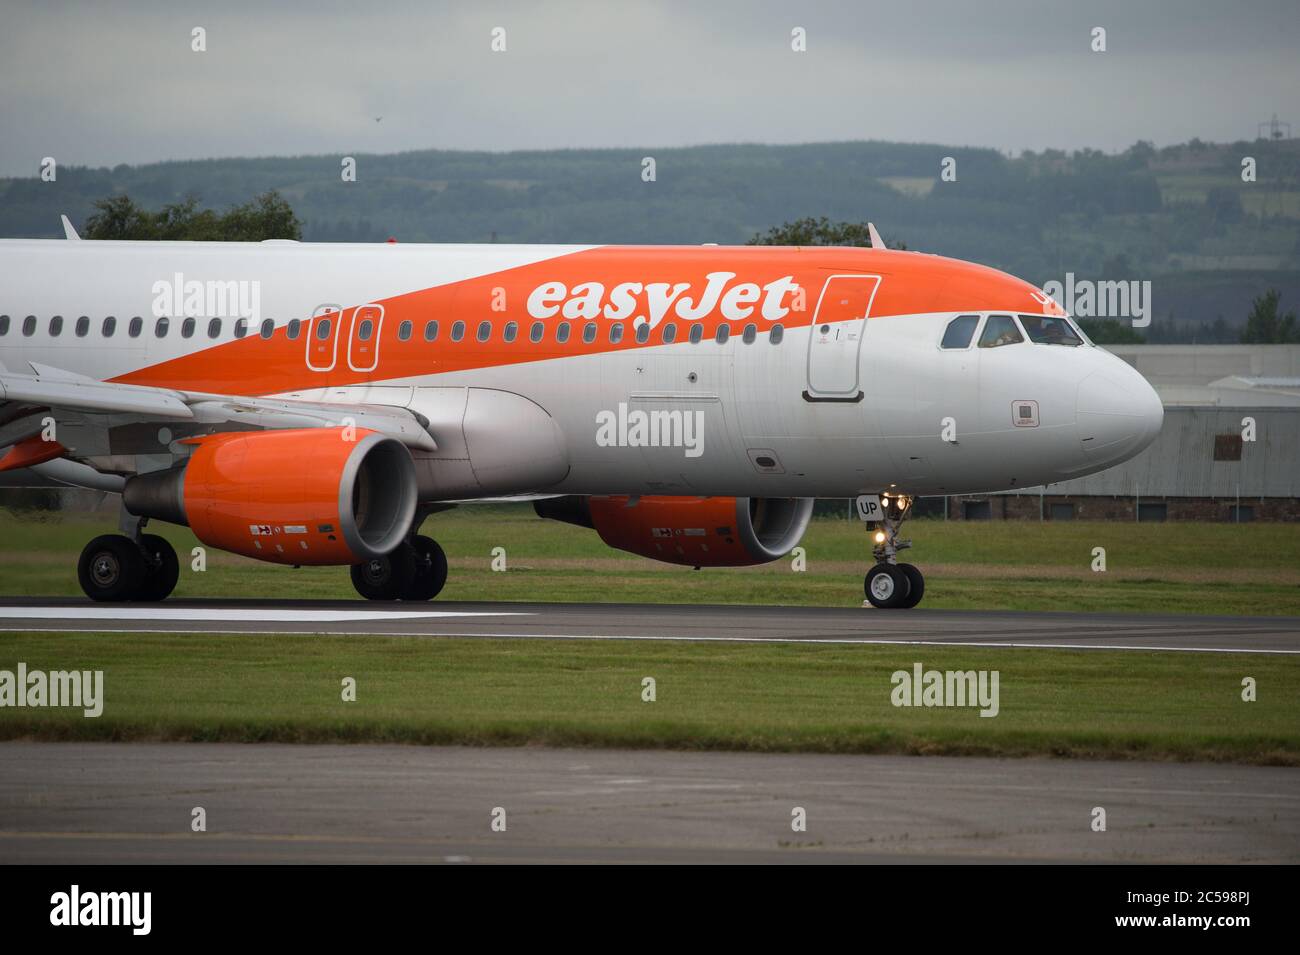 Glasgow, Scotland, UK. 1st July, 2020. Pictured: EasyJet flight from Belfast to Glasgow seen landing at Glasgow. EasyJet says it has begun consultations on plans to close bases at Stansted, Southend and Newcastle. The airline said it is having to introduce cost cutting measures in order to survive the effects of the coronavirus crisis on the airline industry. The Unite union said nearly 1,300 UK crew members faced losing their jobs. Today saw the first day back of full flight schedule releases. Credit: Colin Fisher/Alamy Live News Stock Photo